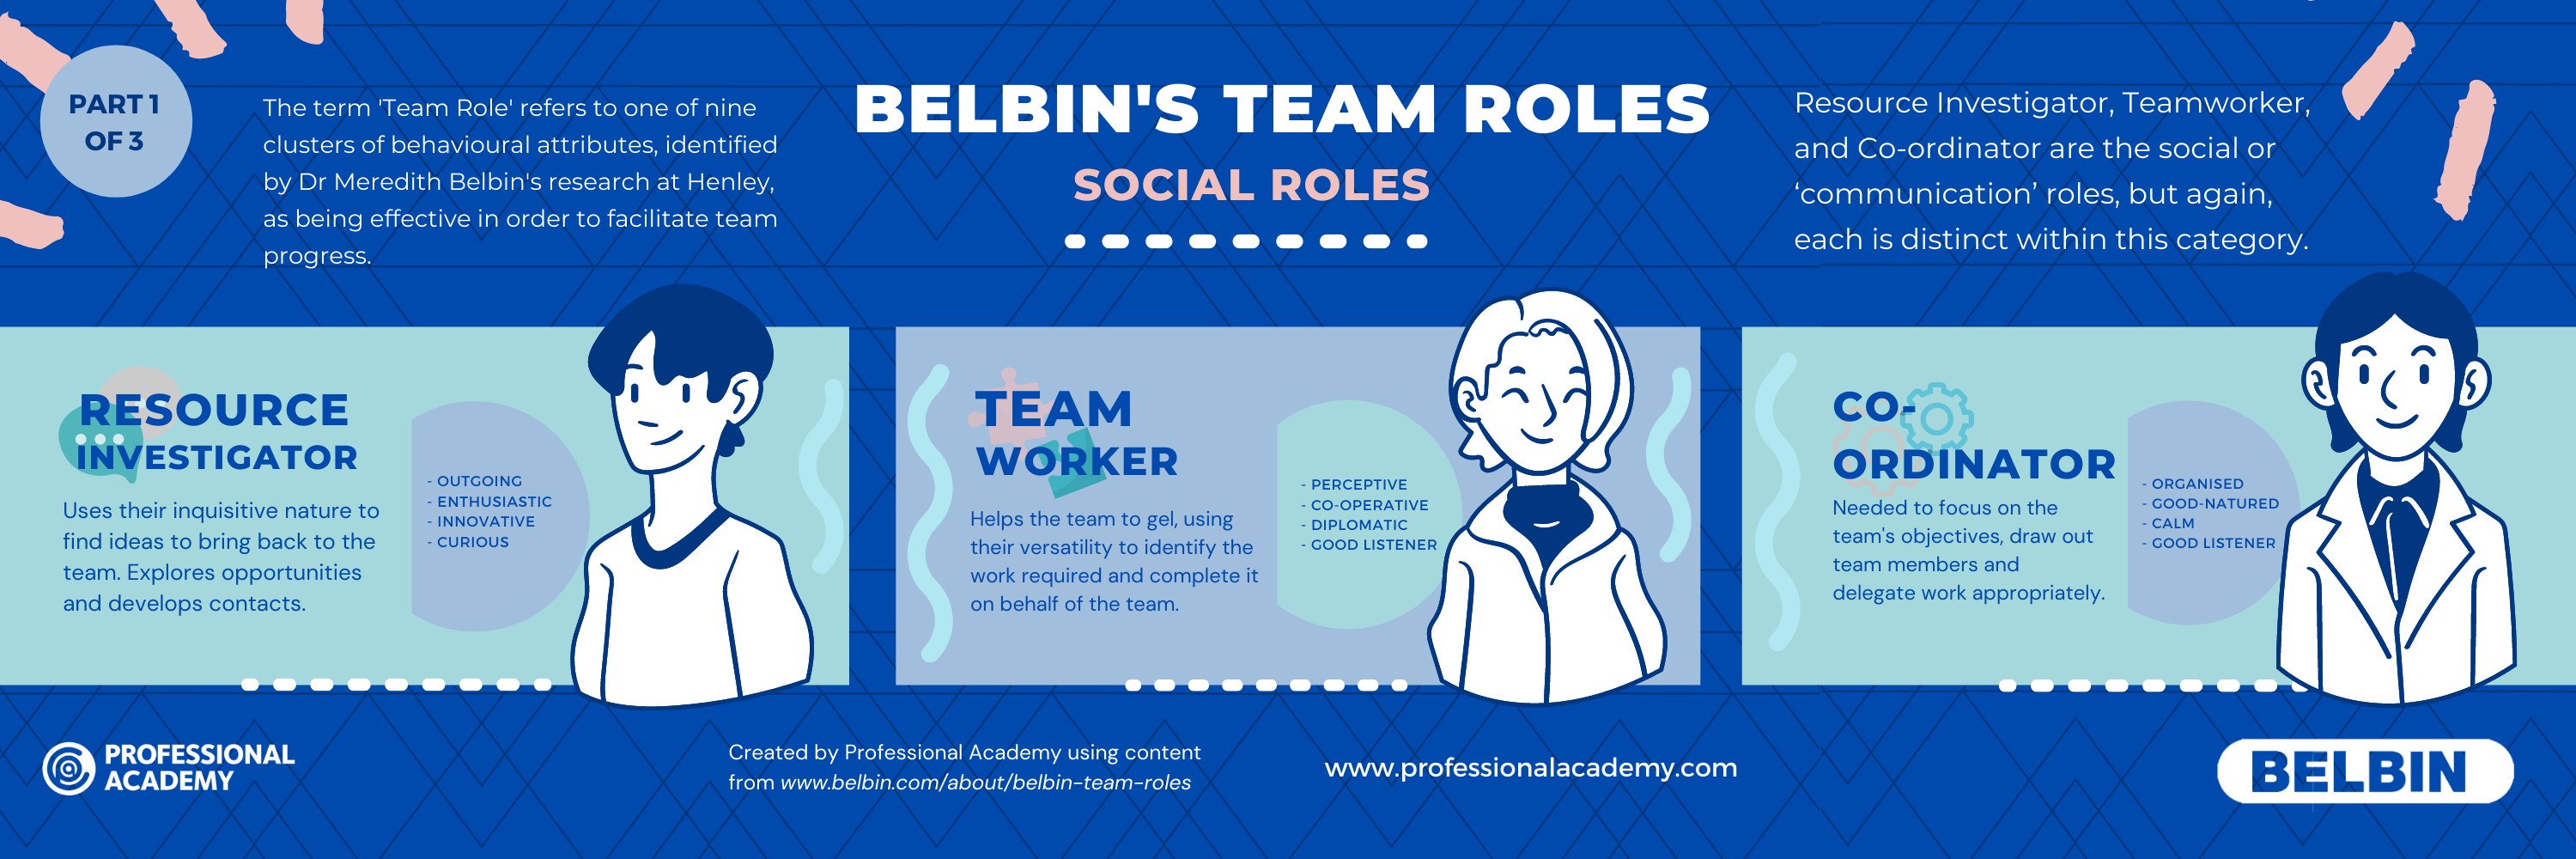 Belbins Theory team roles infographic